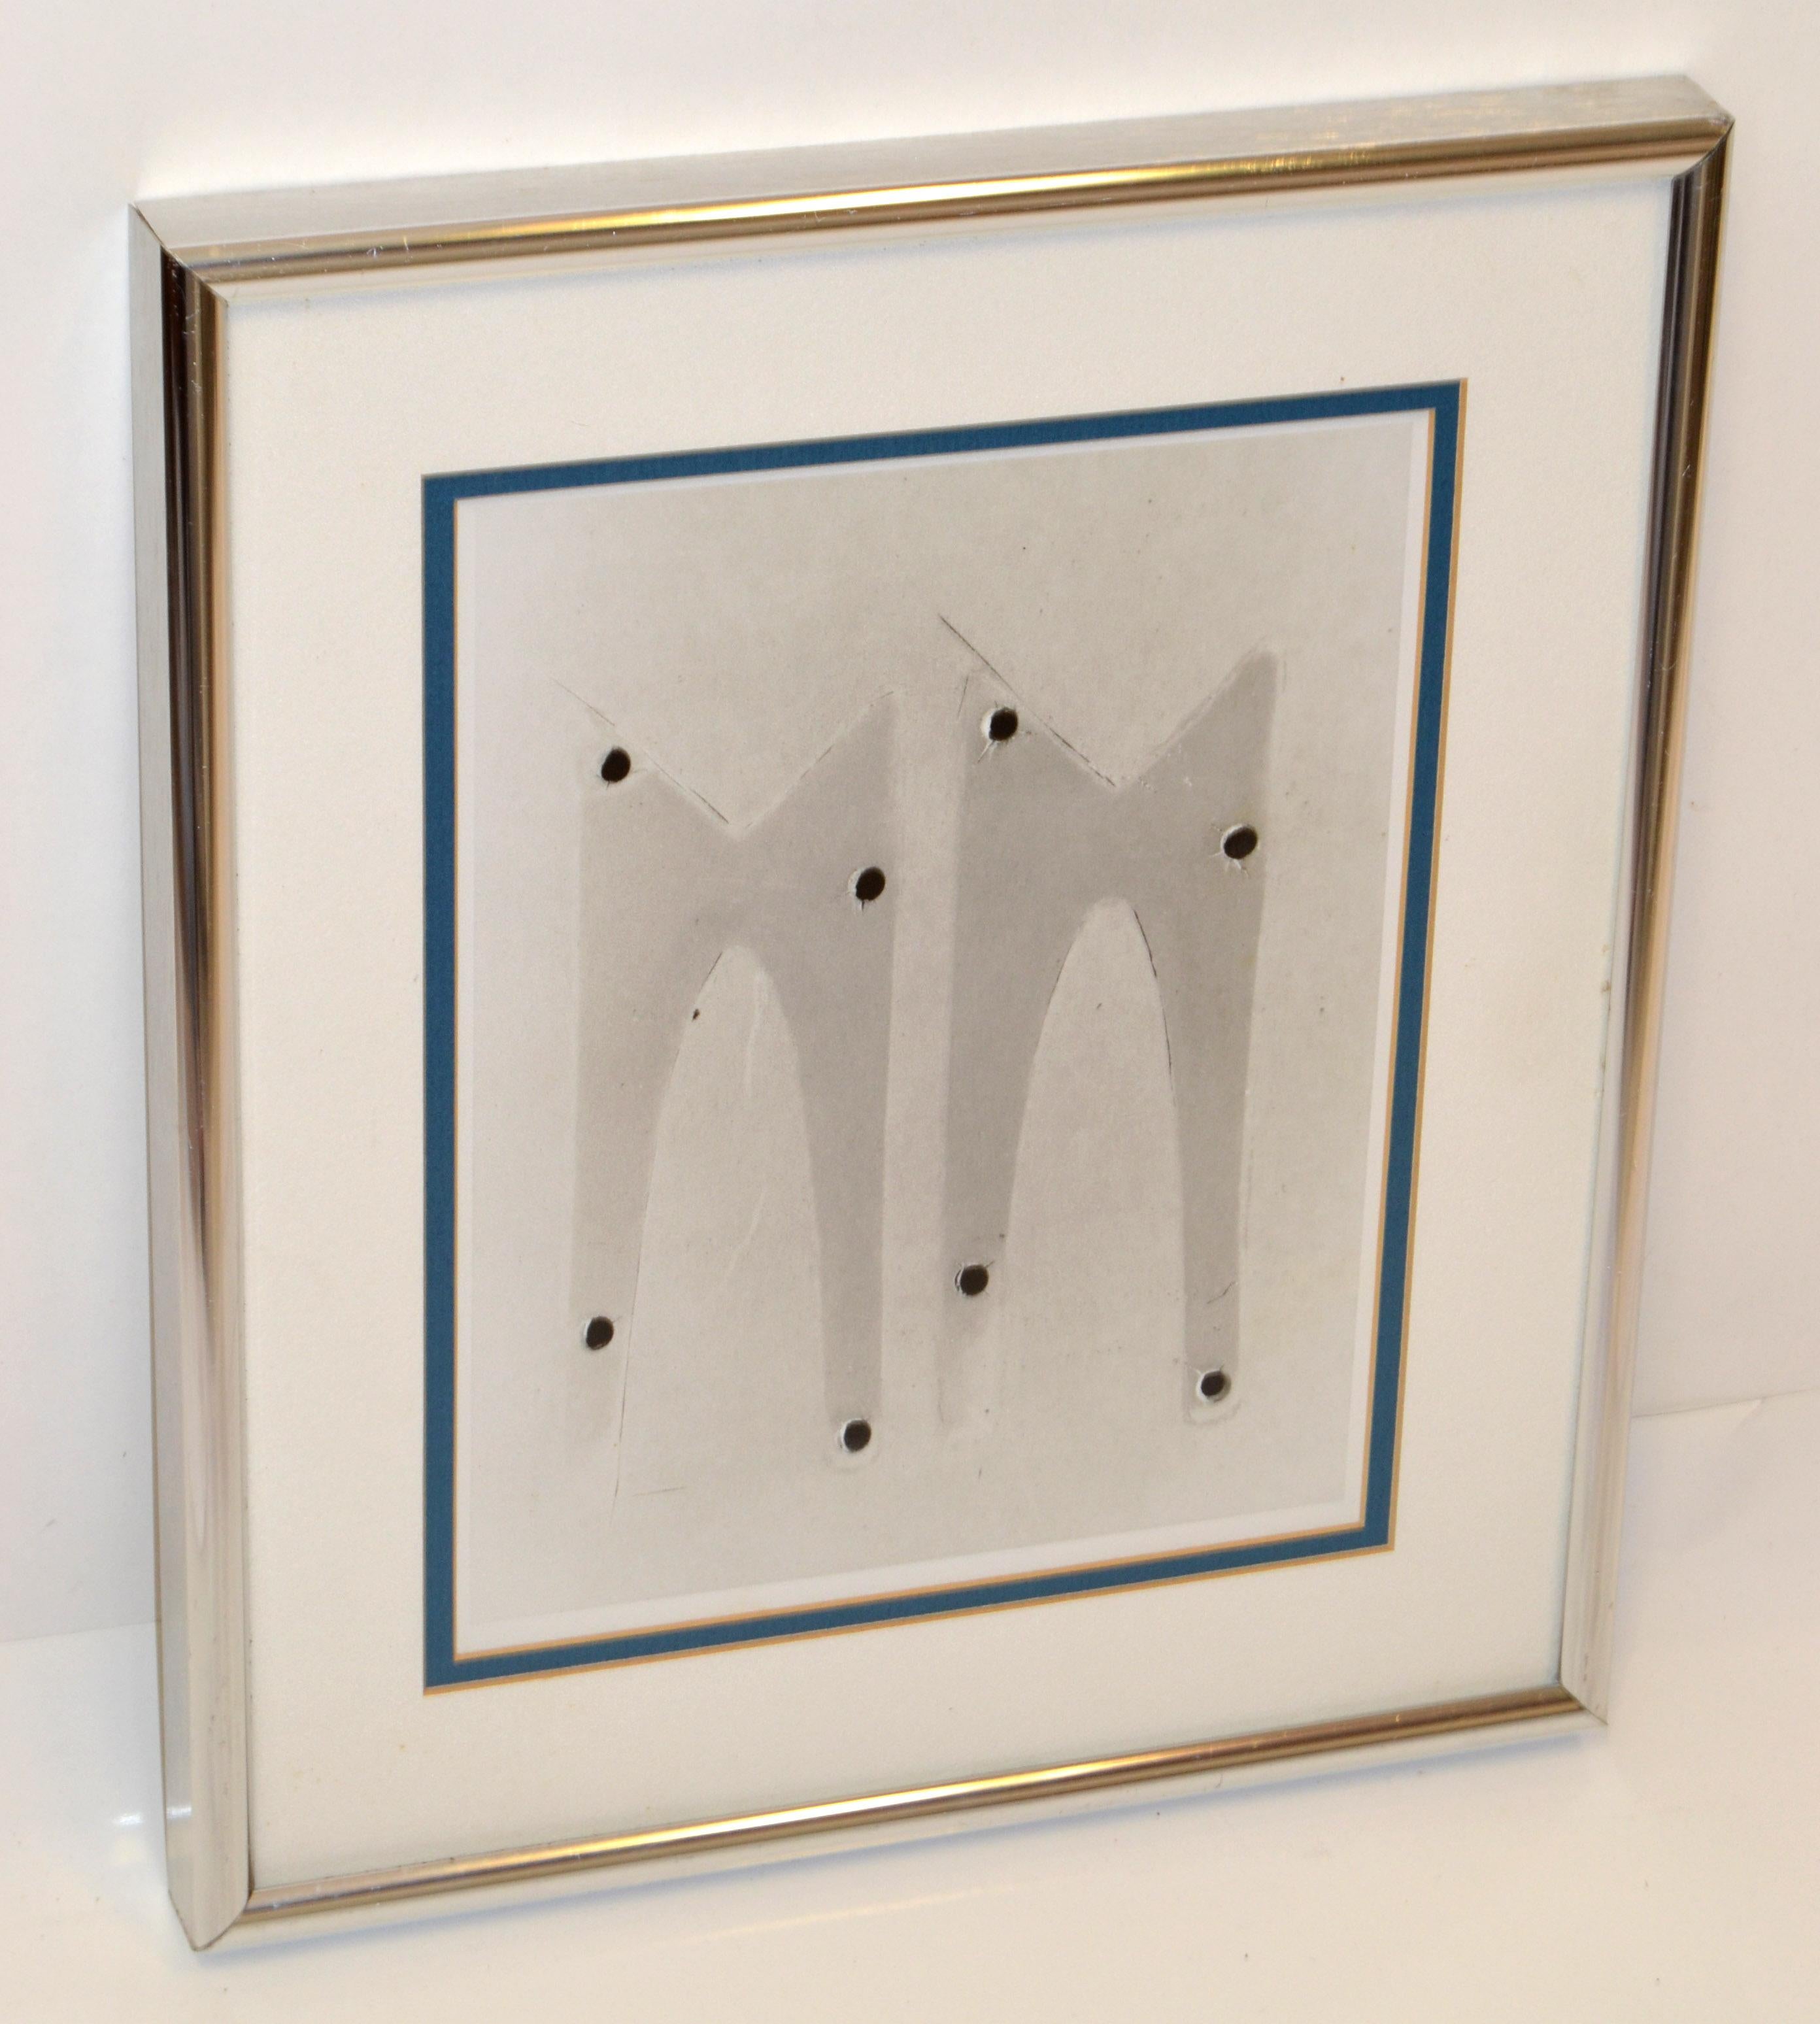 Mid-Century Modern Mixed Media Paper Cut Art encased with a Glass and Chrome Frame.
Numbered on the back.
Art Size measures: 8.25 x 10 inches.
Great Gift Idea for a new Home, Birthday or Anniversary.